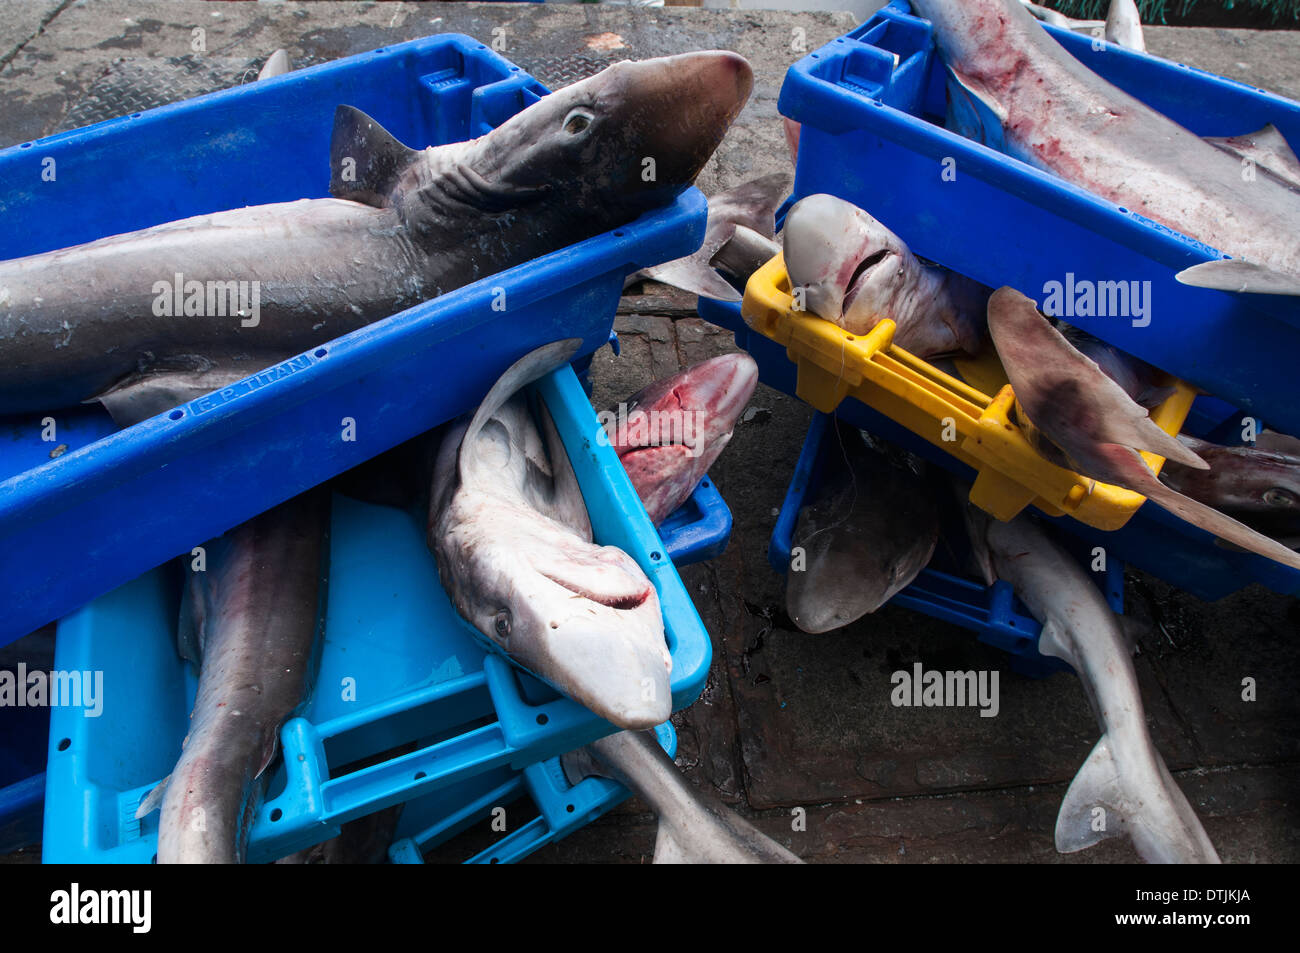 Tope sharks off-loaded from deep water long-line fishing boat. Stock Photo